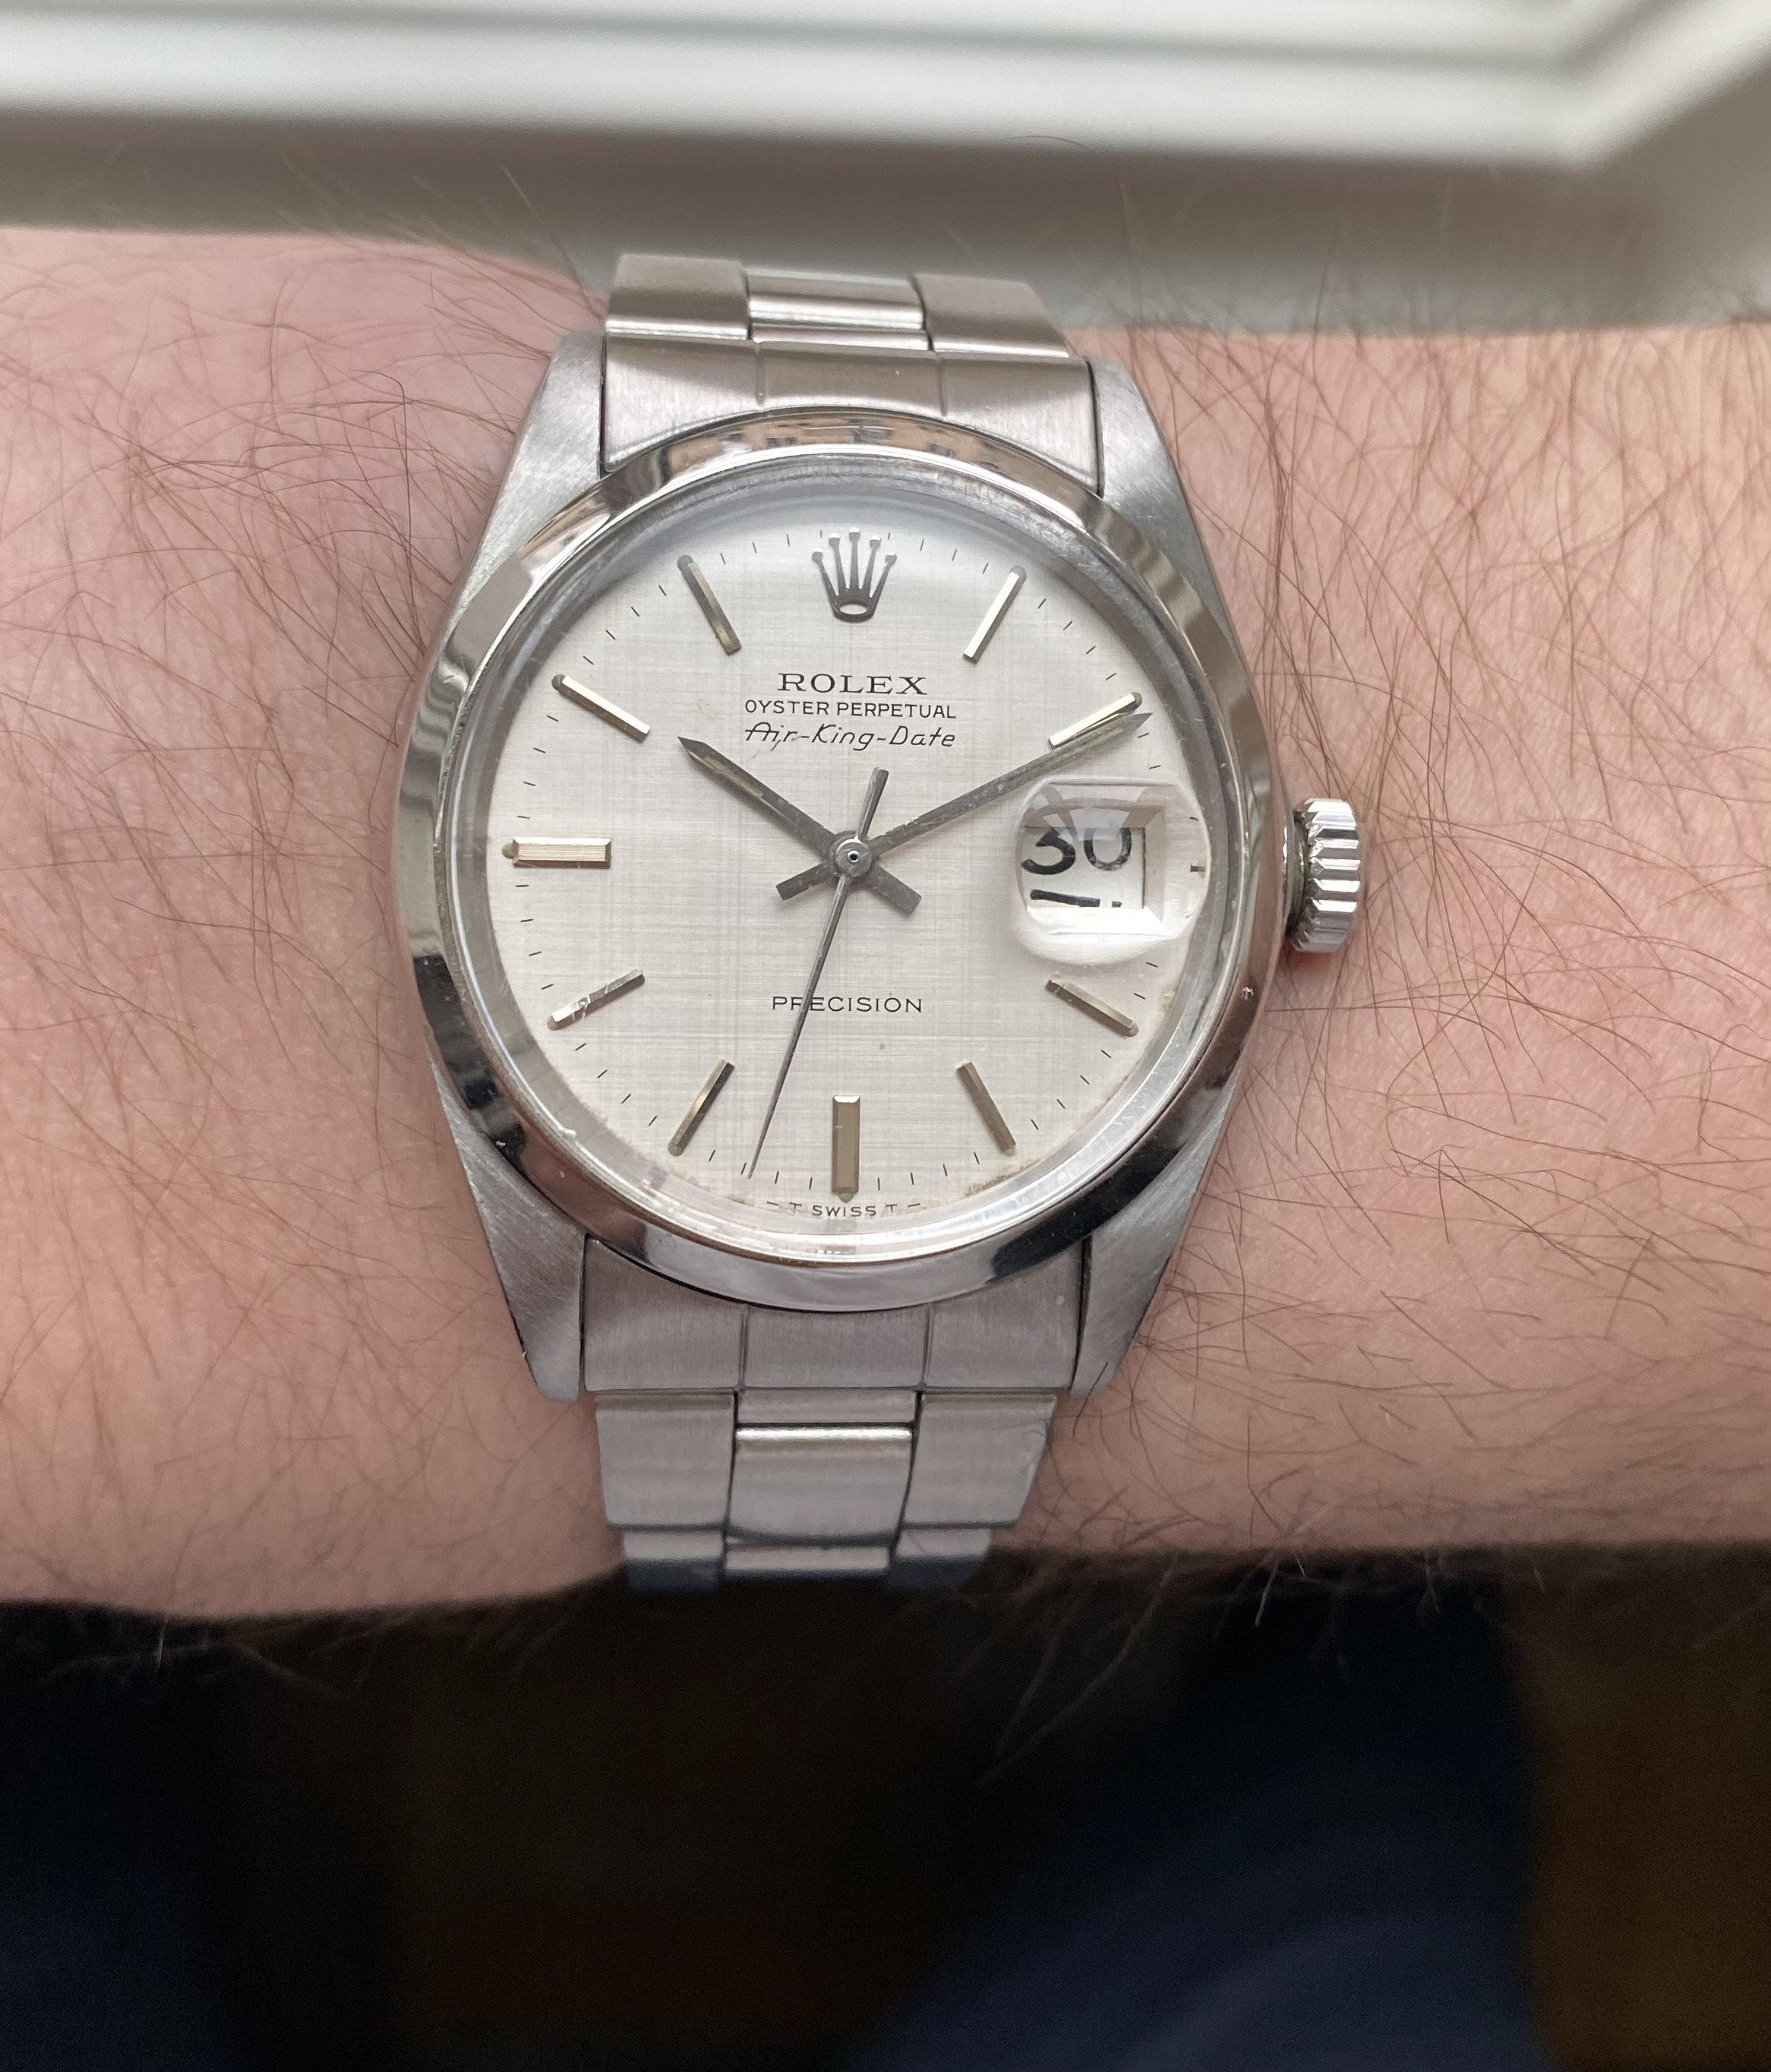 Vintage Rolex Air-king Date 5700 Precision Automatic Silver - Etsy